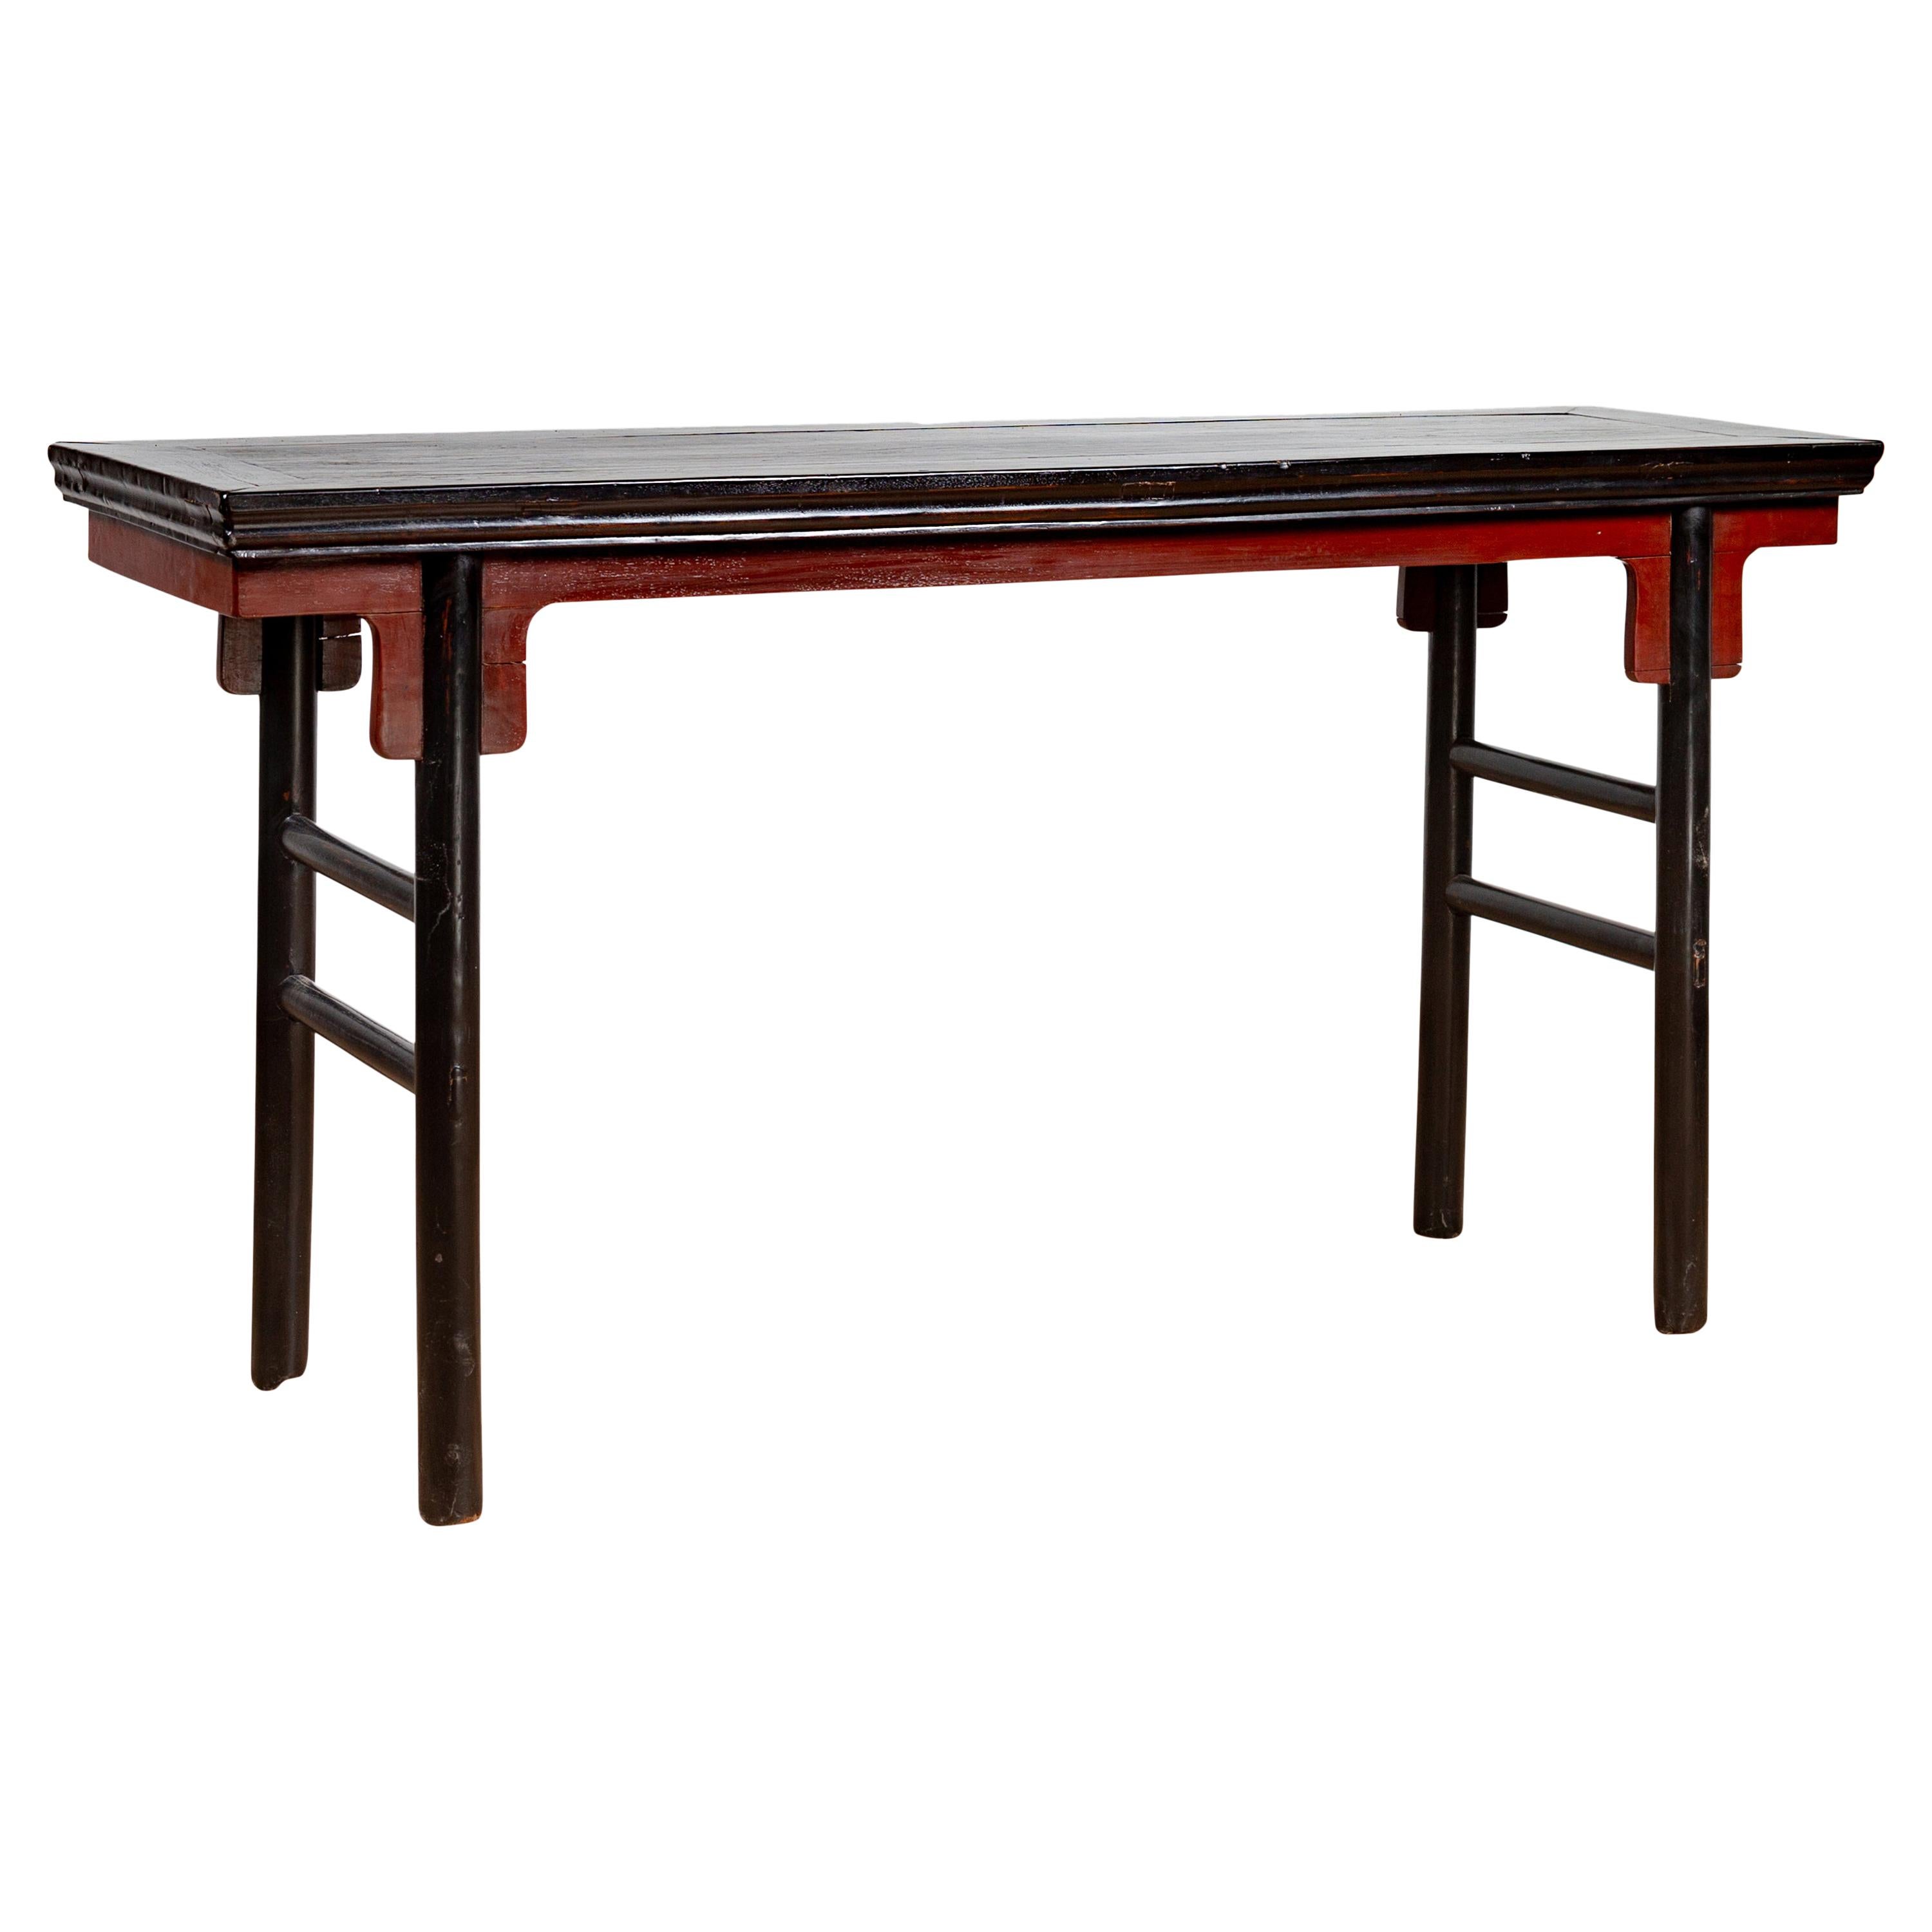 Chinese Ming Dynasty Style Black Lacquered Altar Console Table with Red Apron